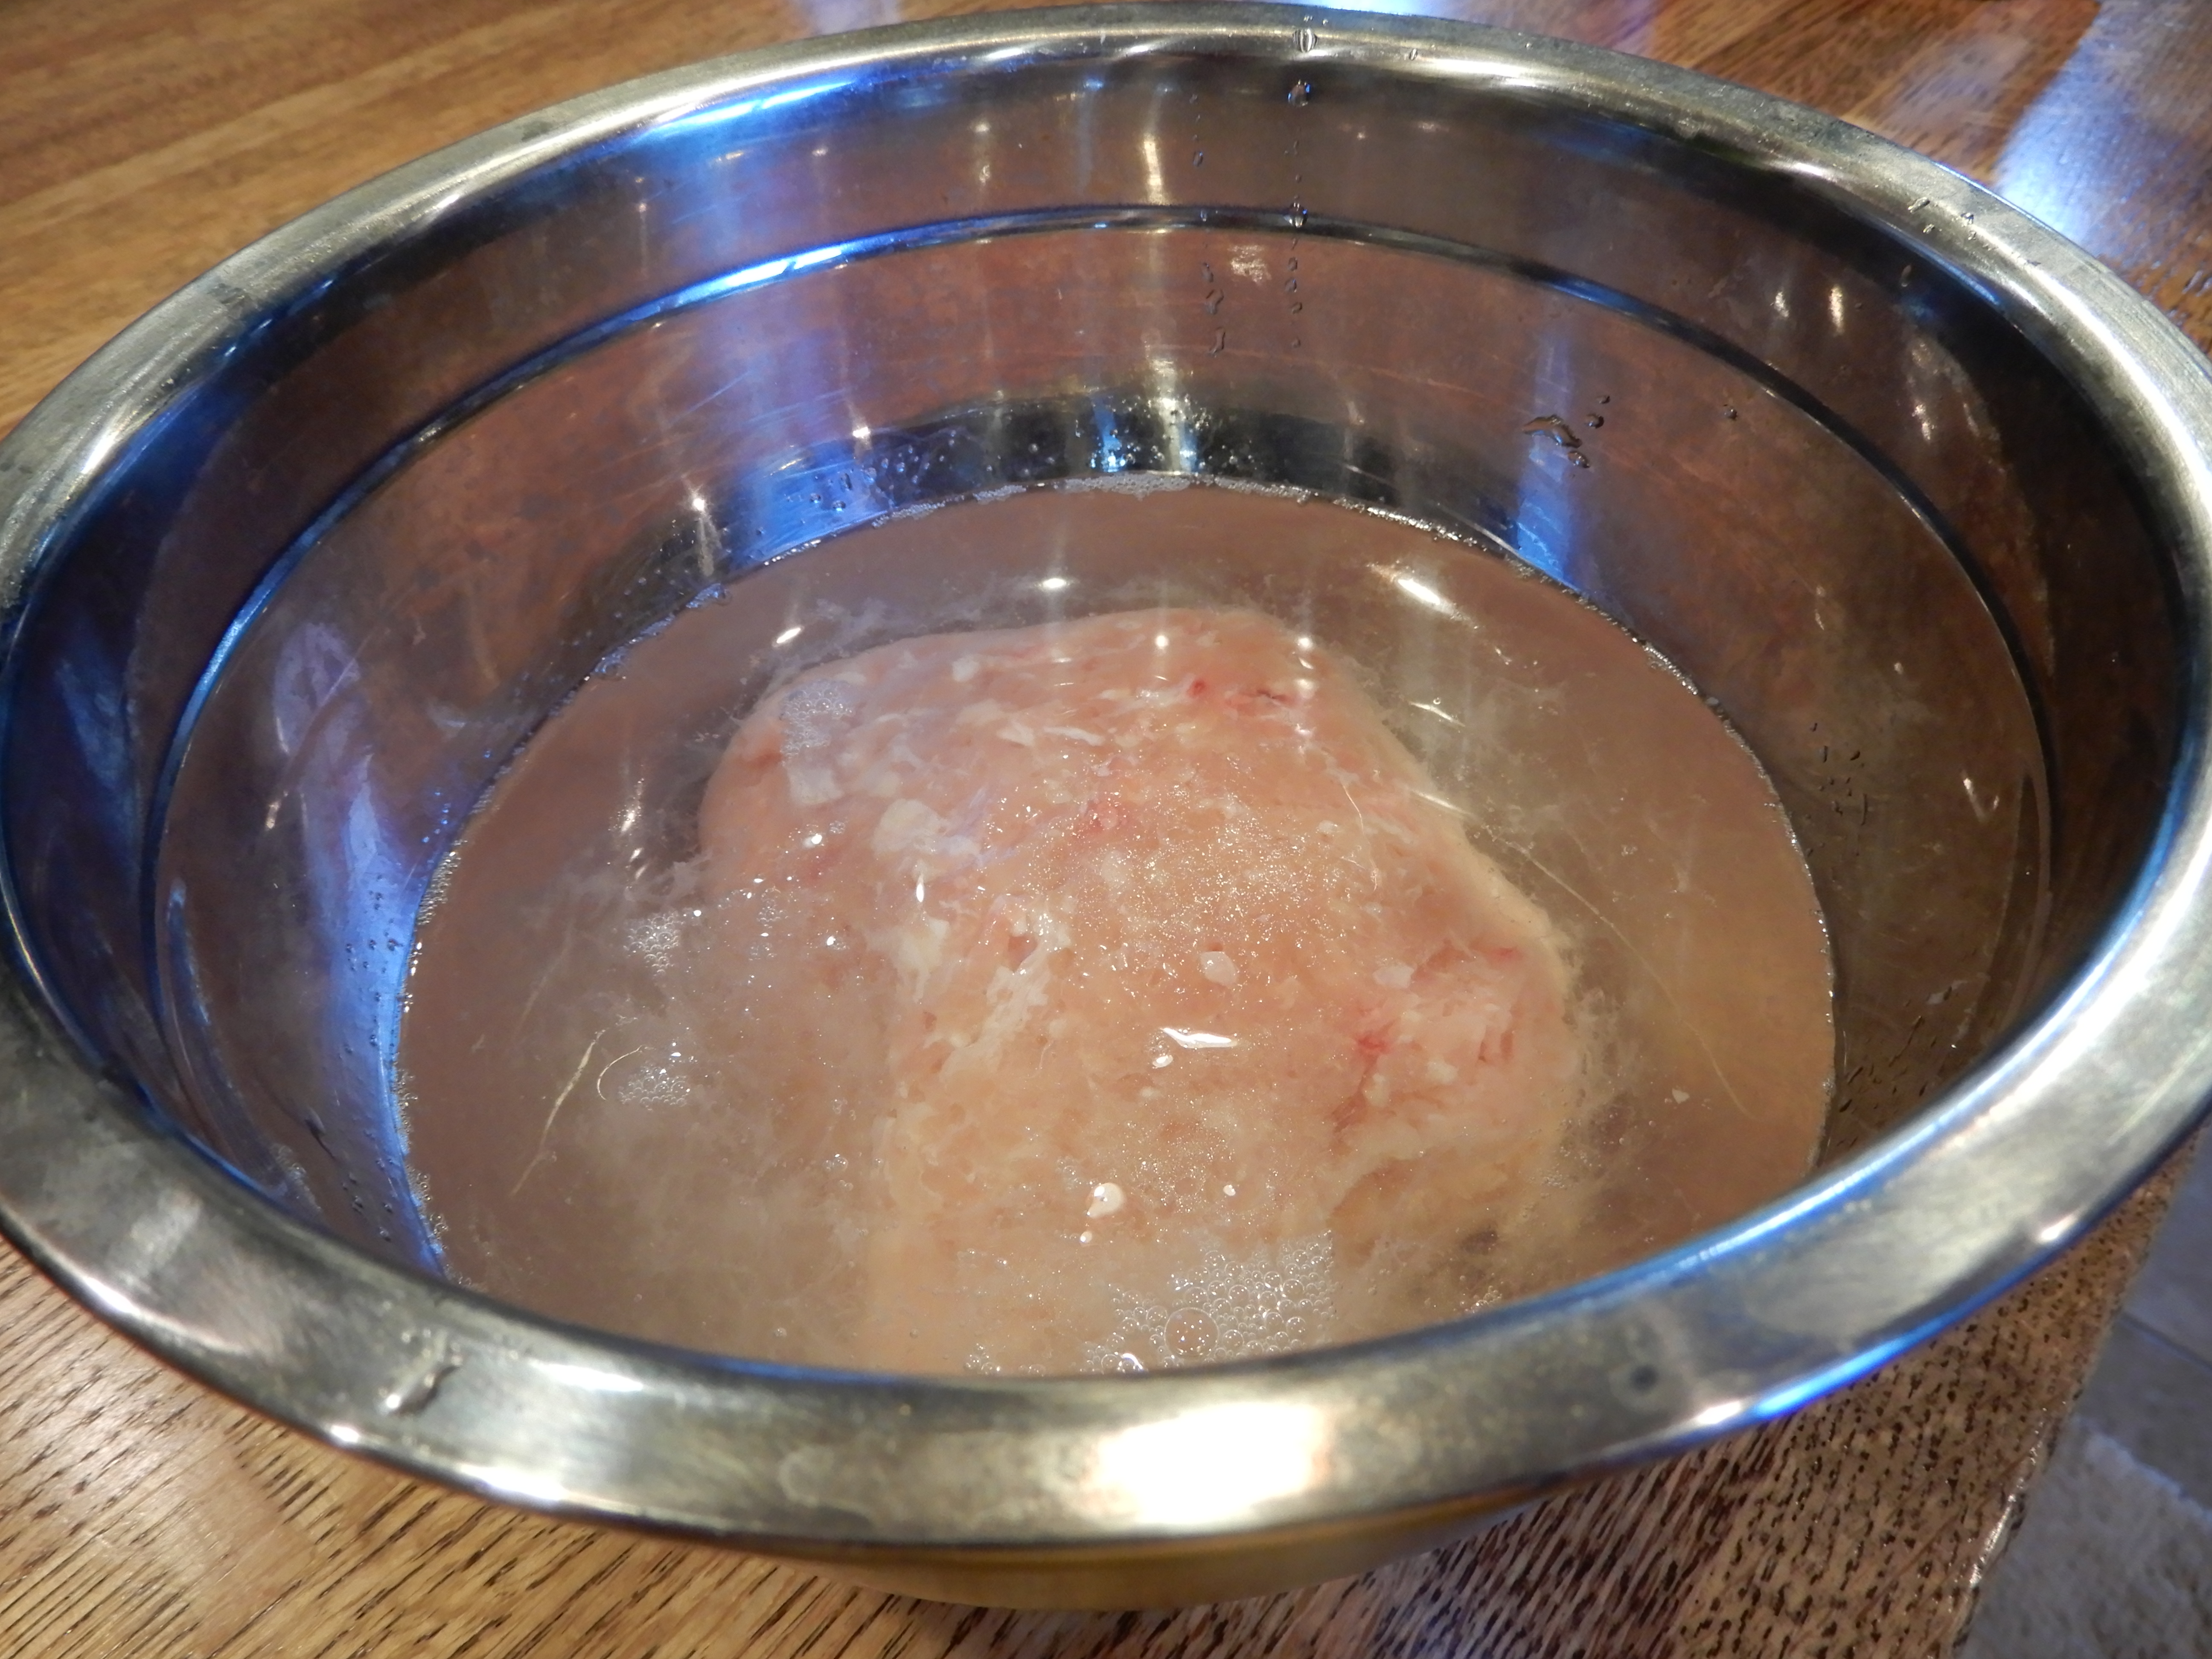 Cover the meat with water for cooking